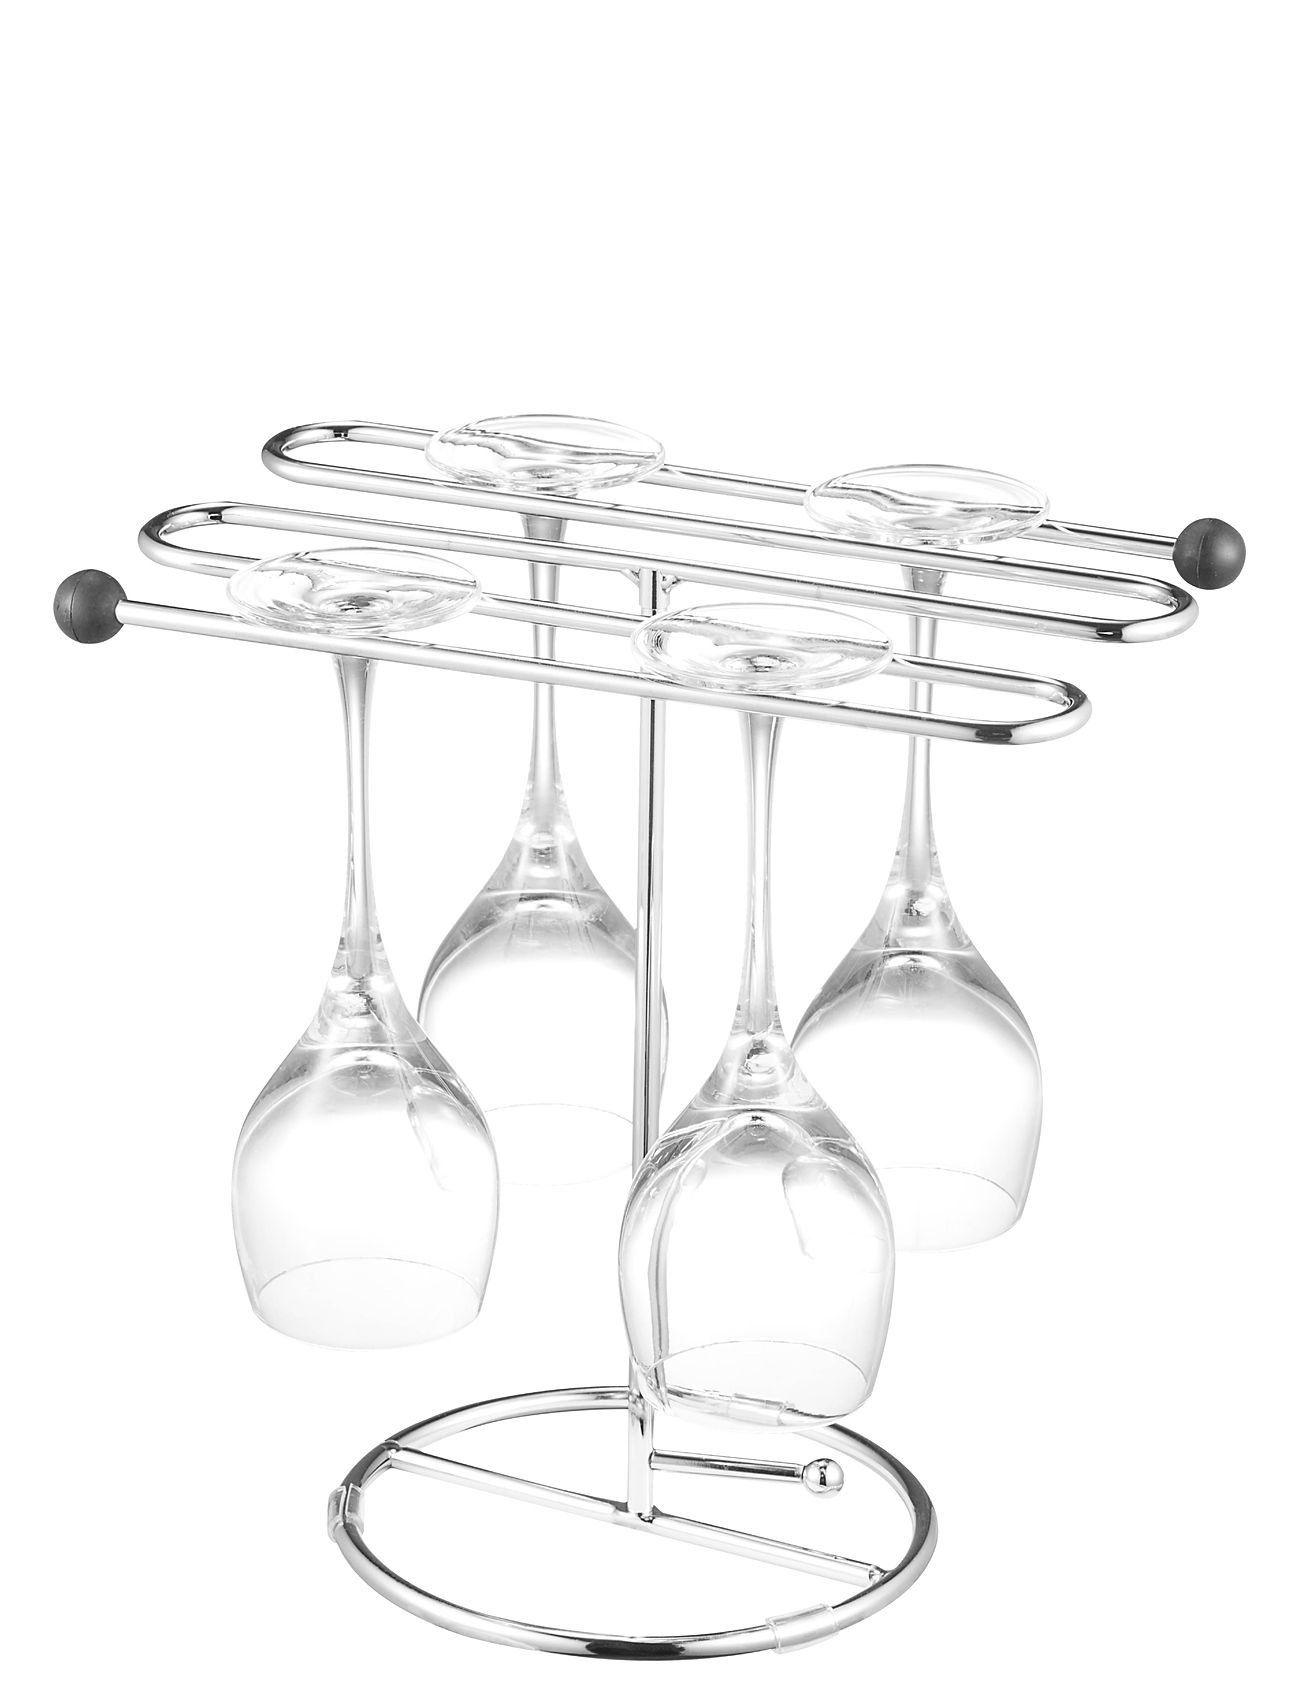 Drying Rack Wine Glass Tyra Home Kitchen Wash & Clean Dishes Dish Rack Silver Dorre